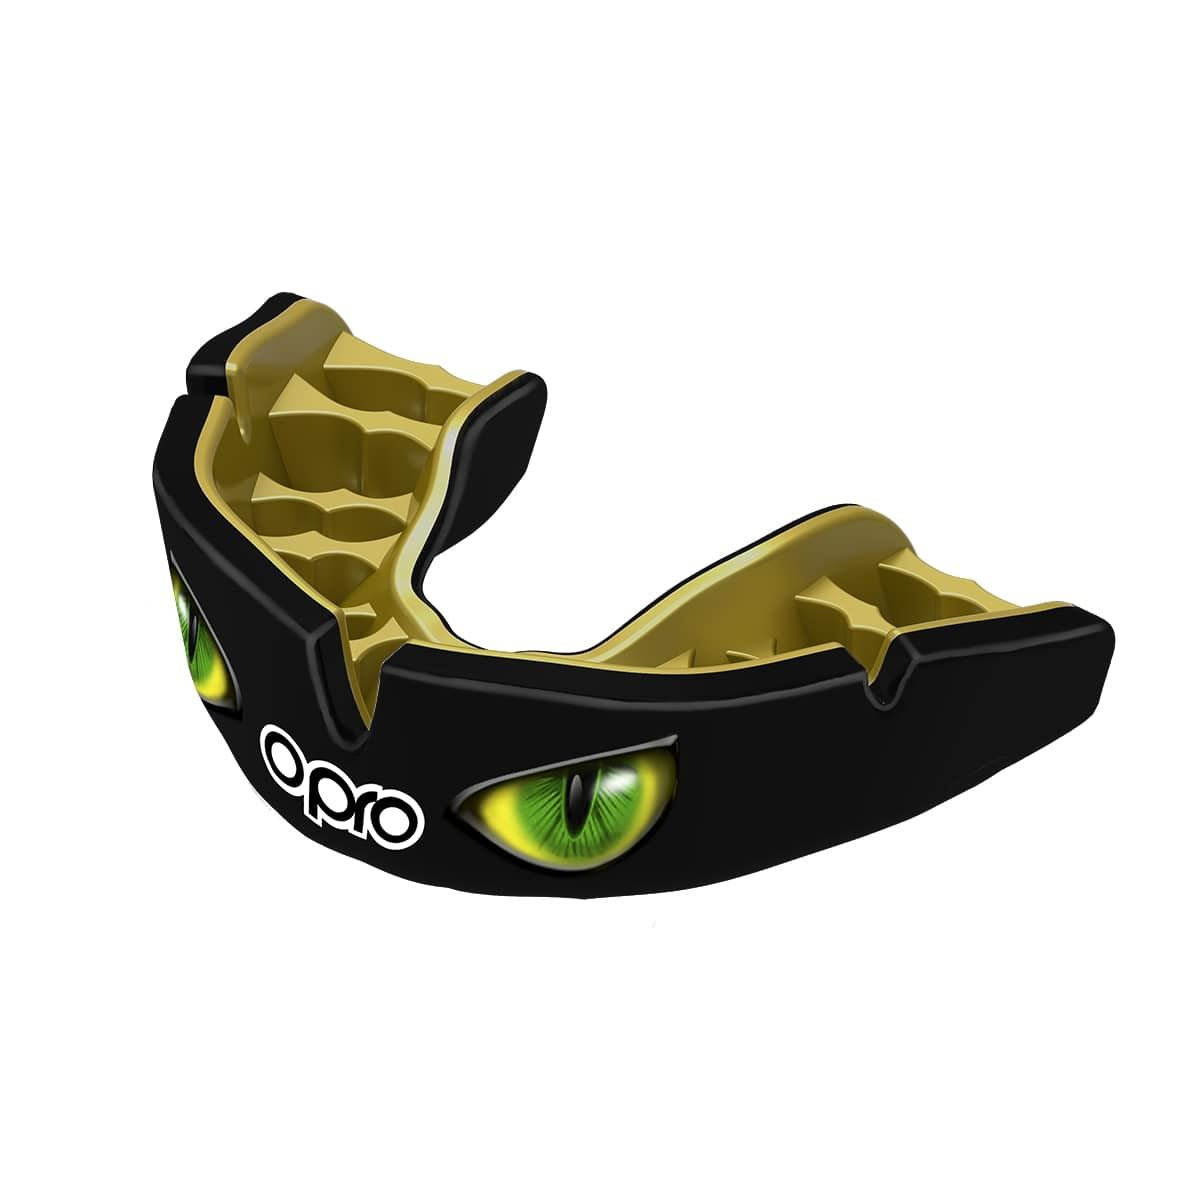 Men's Rugby Protective Mouthguard Opro Instant Custom Fit Eyes 2022 Black/Green/Gold